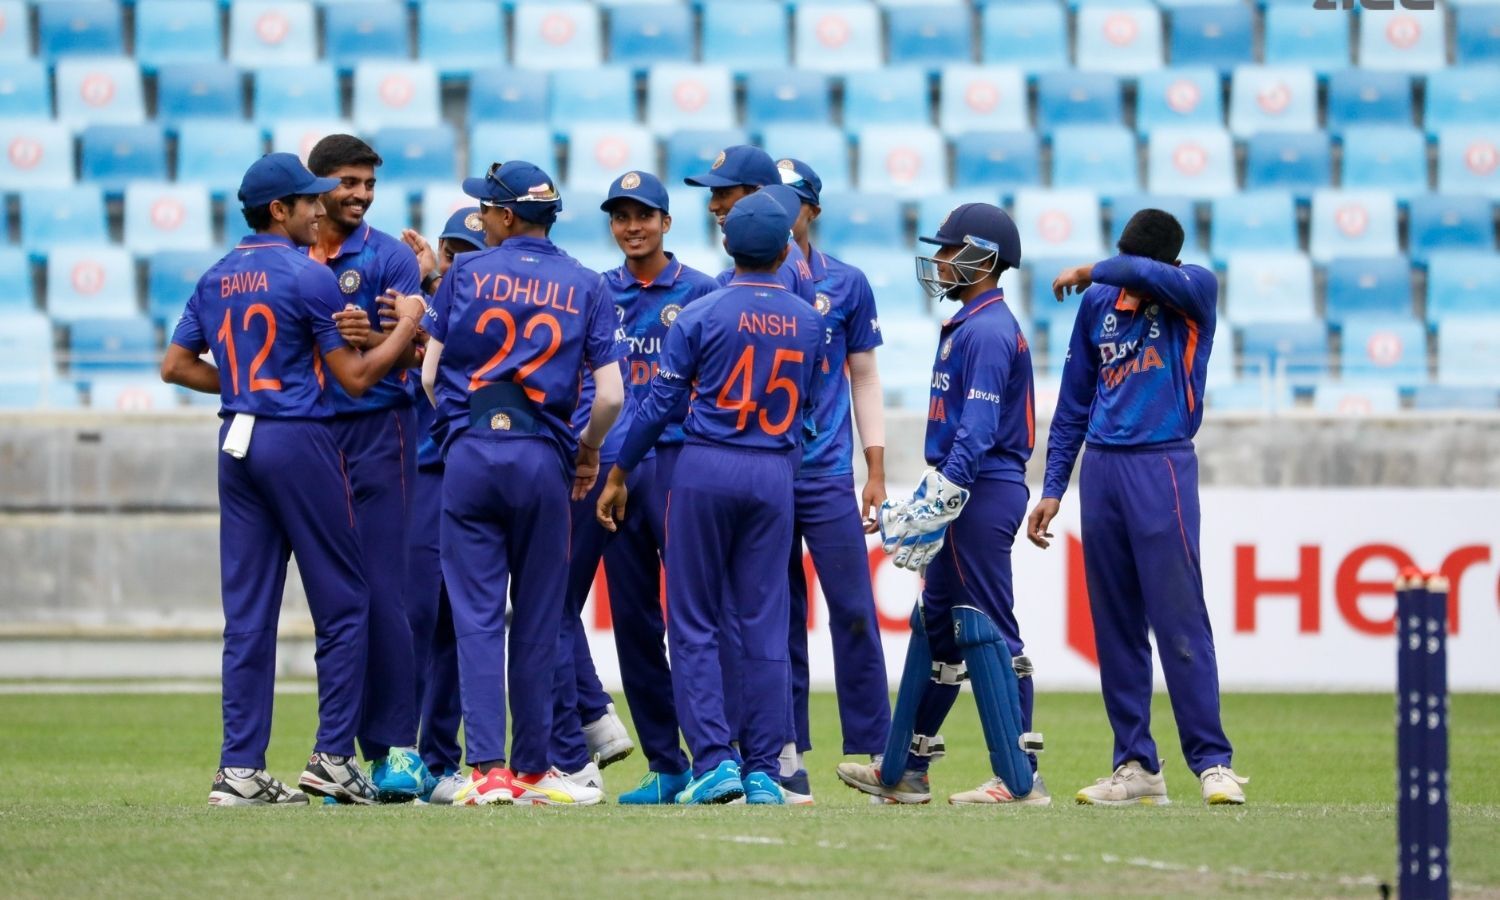 u19 world cup live score today